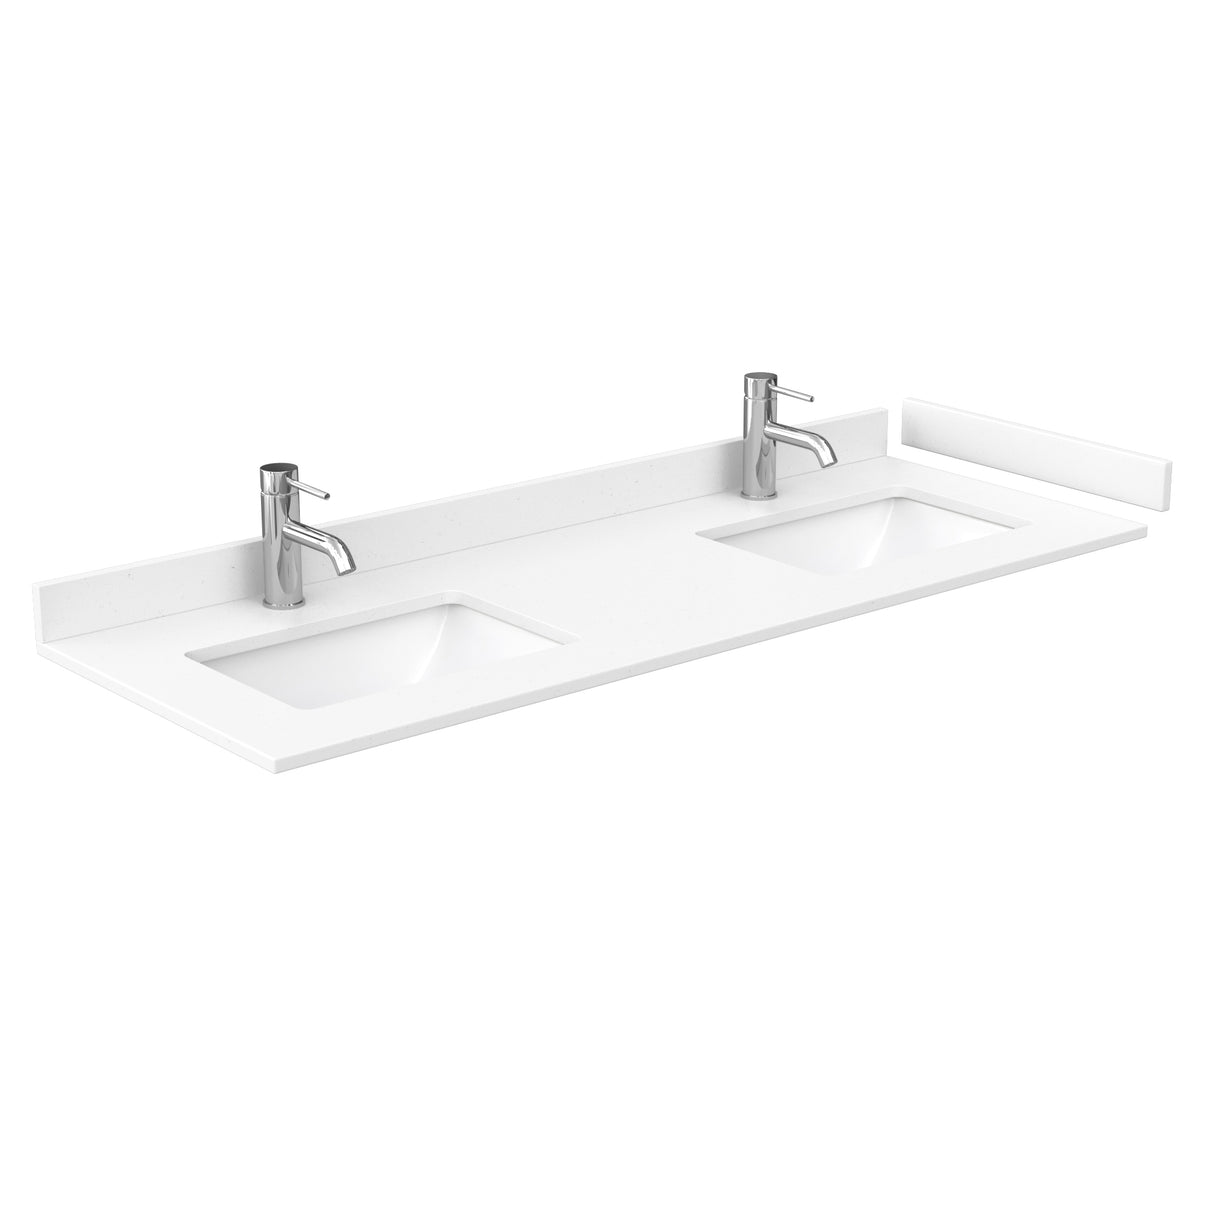 Daria 60 Inch Double Bathroom Vanity in White White Cultured Marble Countertop Undermount Square Sinks 24 Inch Mirrors